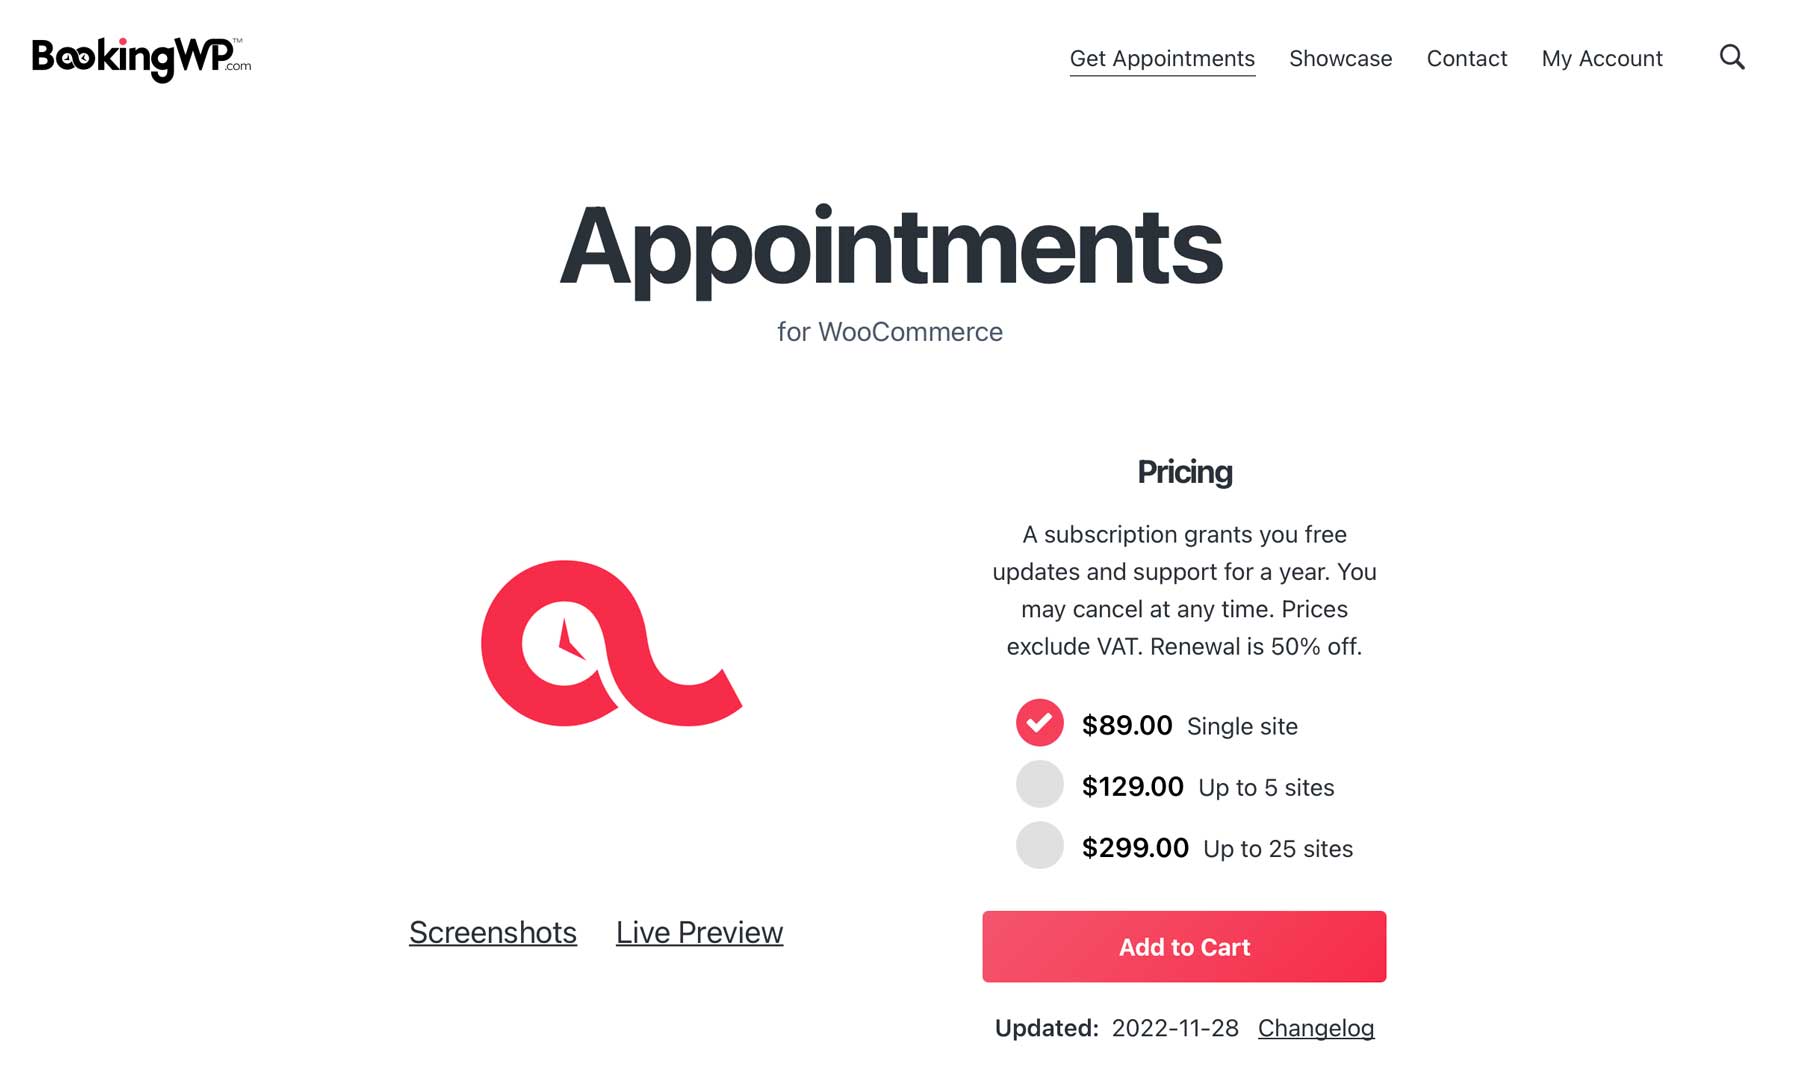 The WooCommerce Appointments plugin by BookingWP